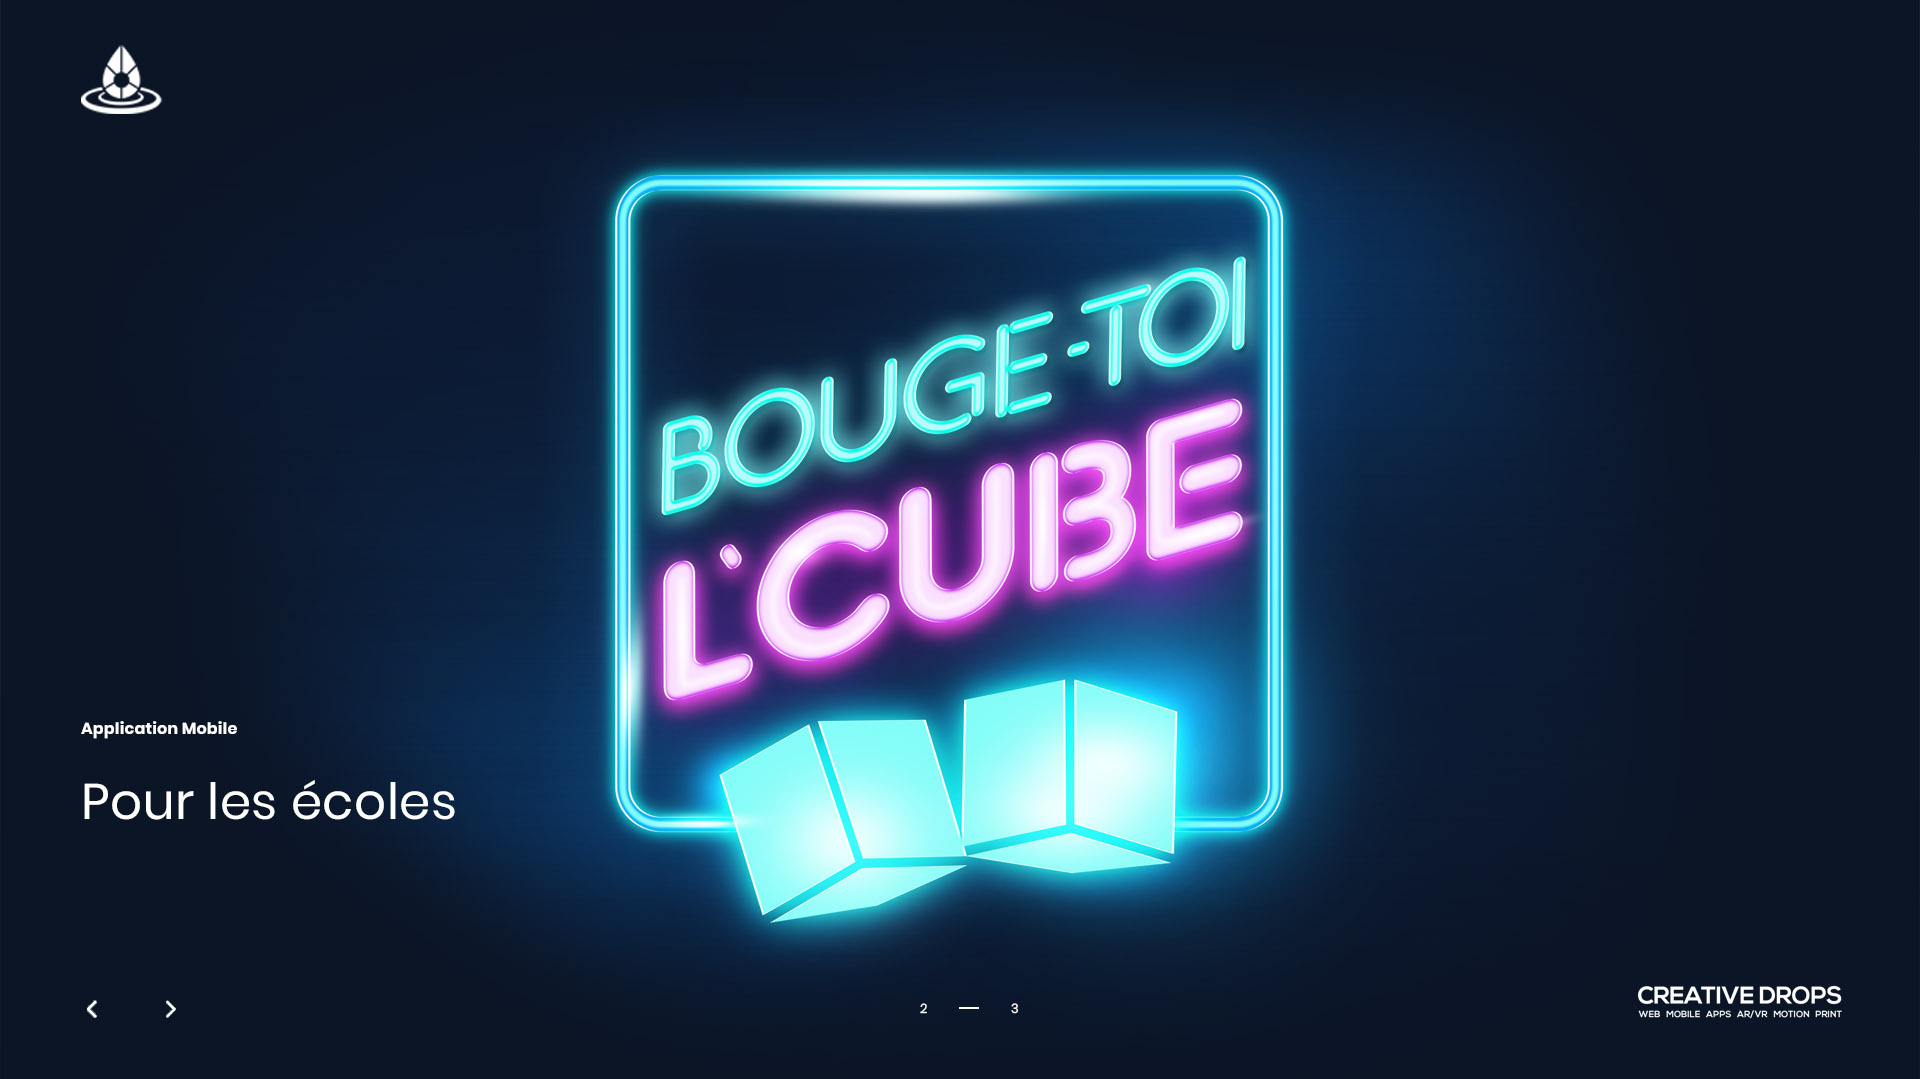 Bouge-toi l'Cube